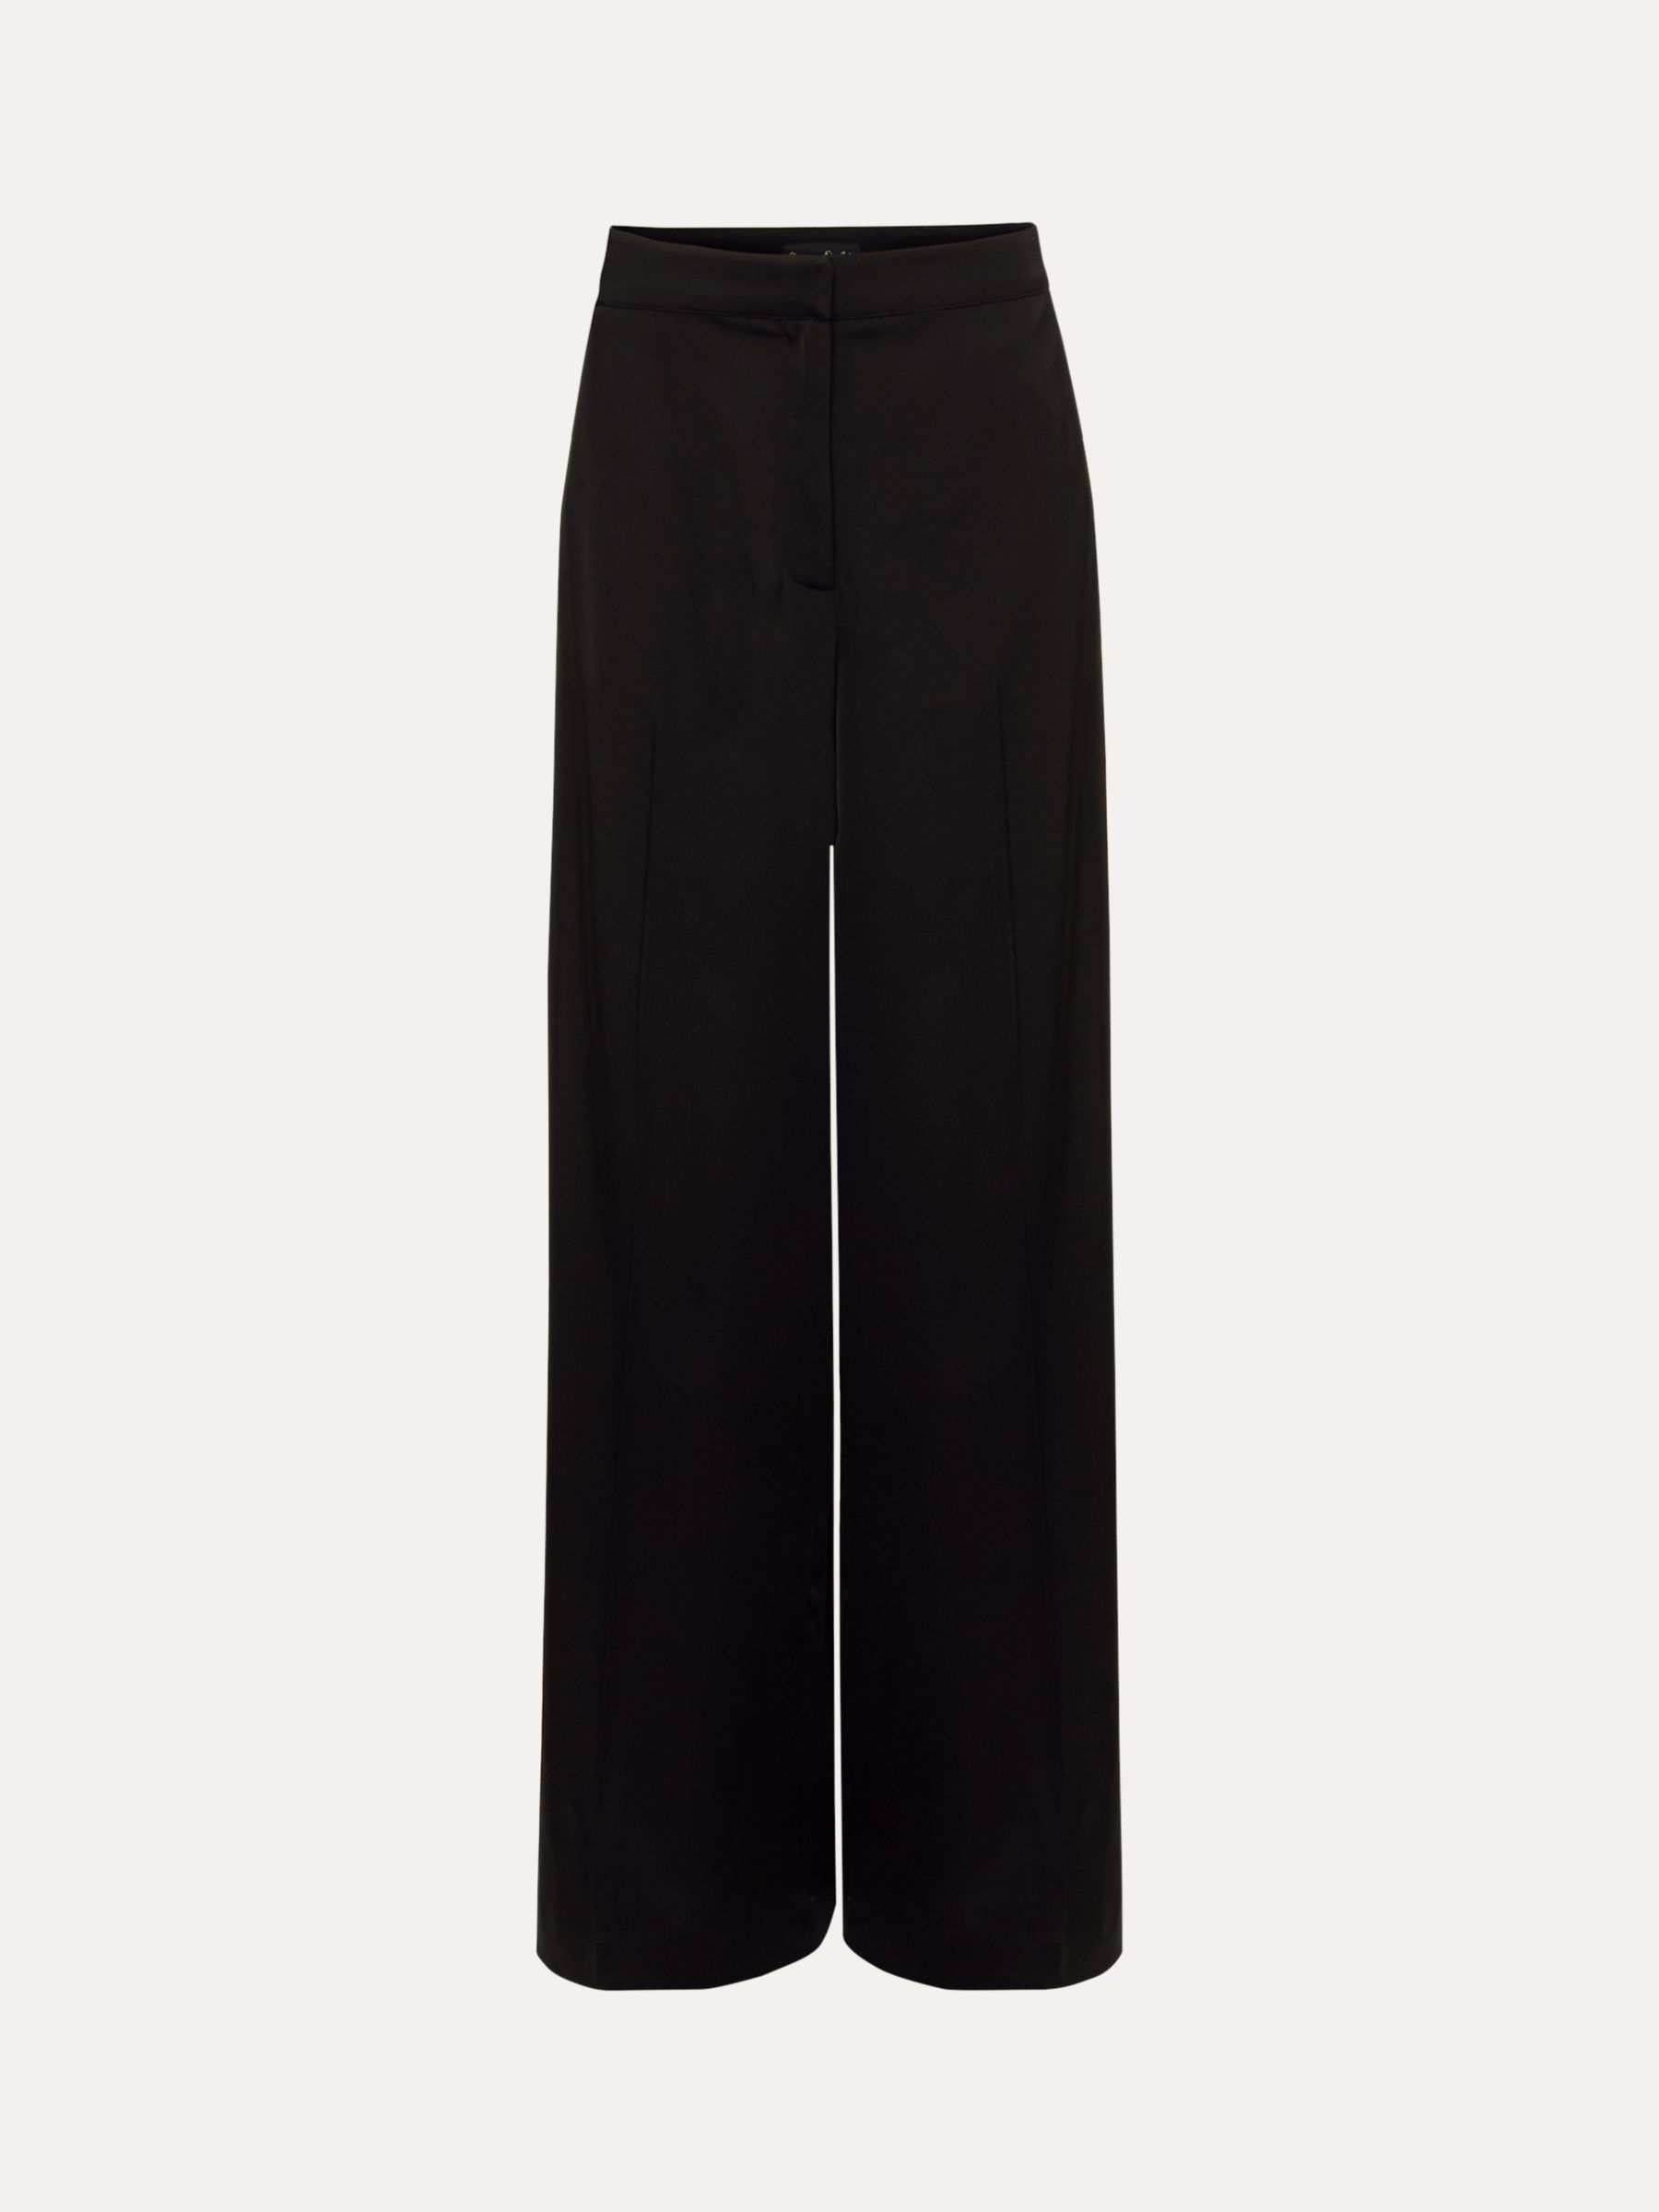 Phase Eight Florentine Wide Leg Trousers, Black at John Lewis & Partners